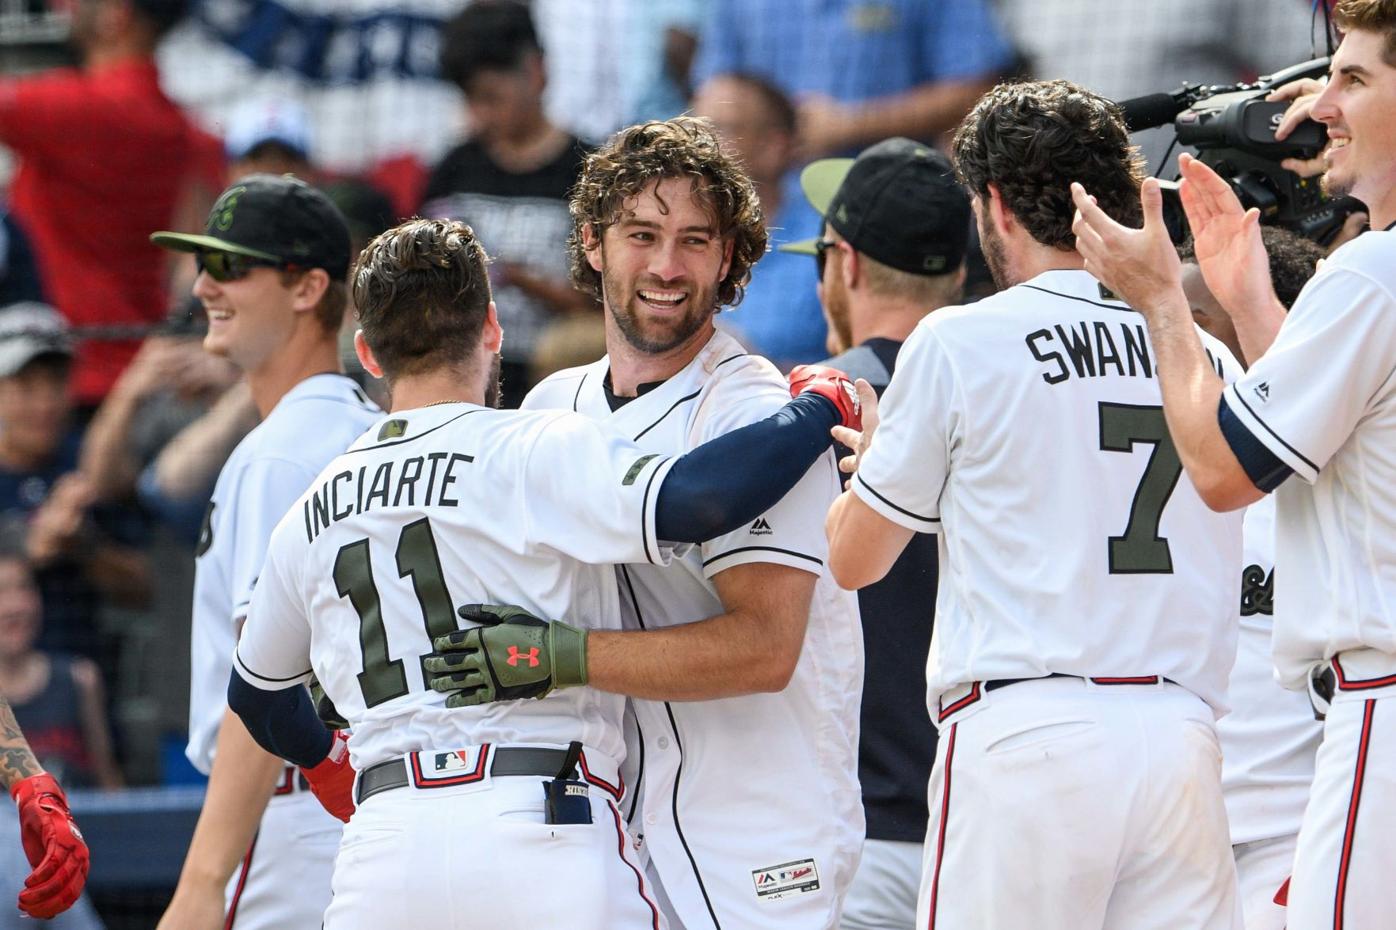 charlie culberson and dansby swanson